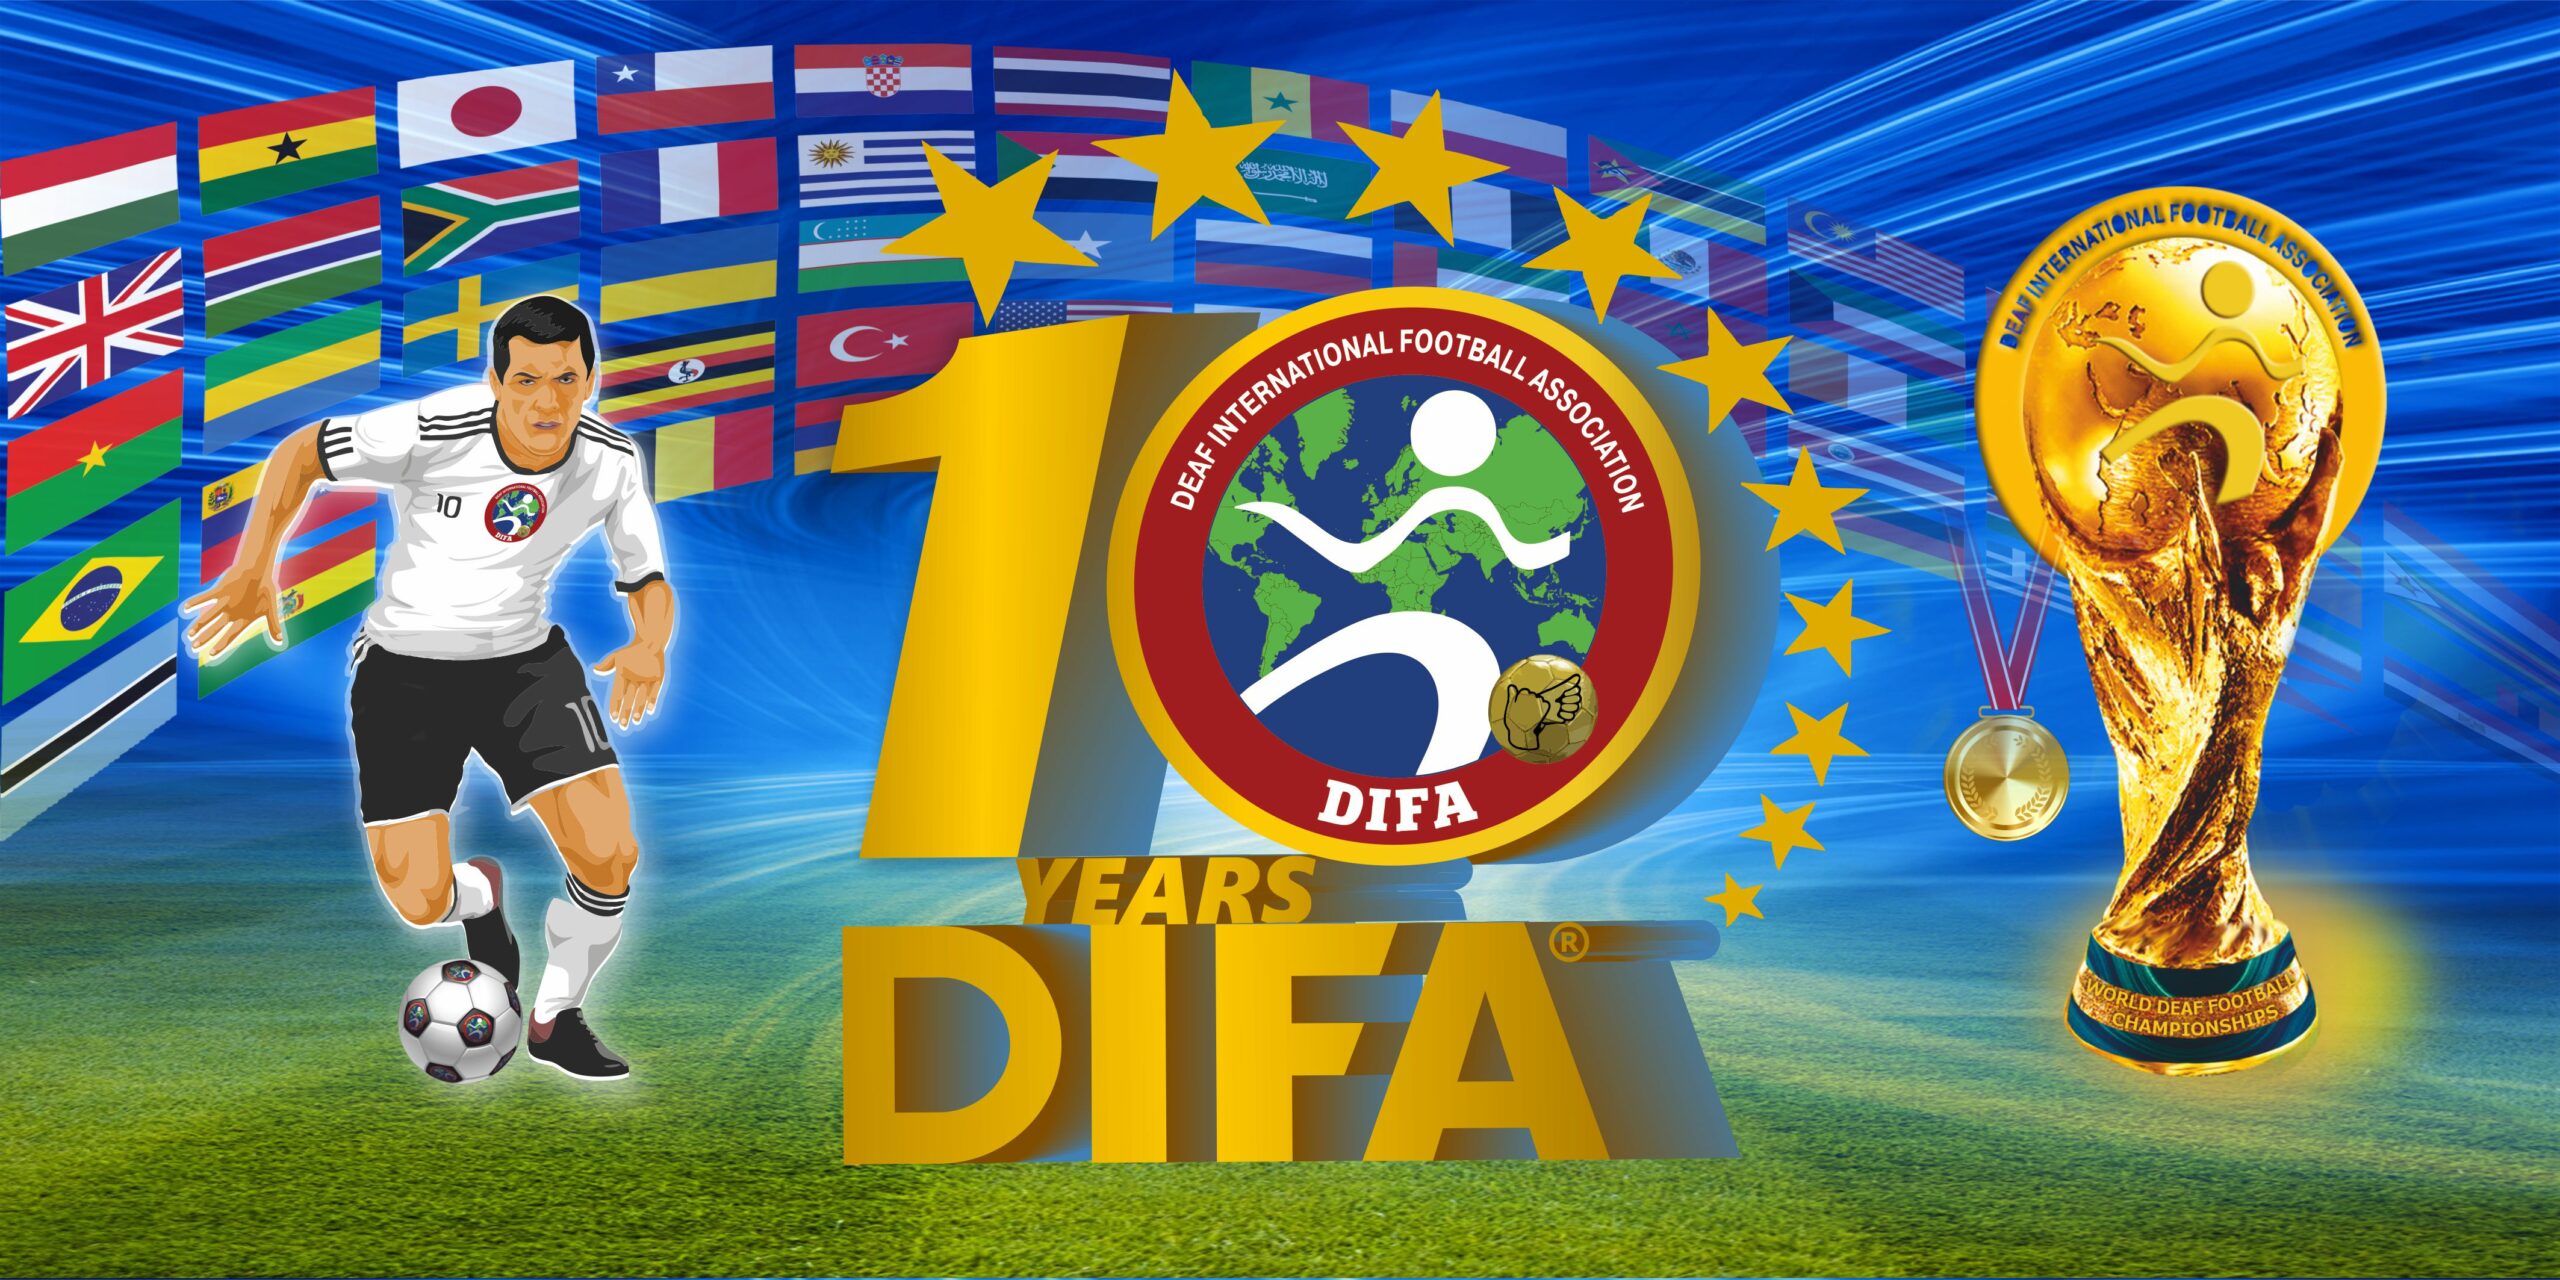 Towards the 10th anniversary of the DIFA